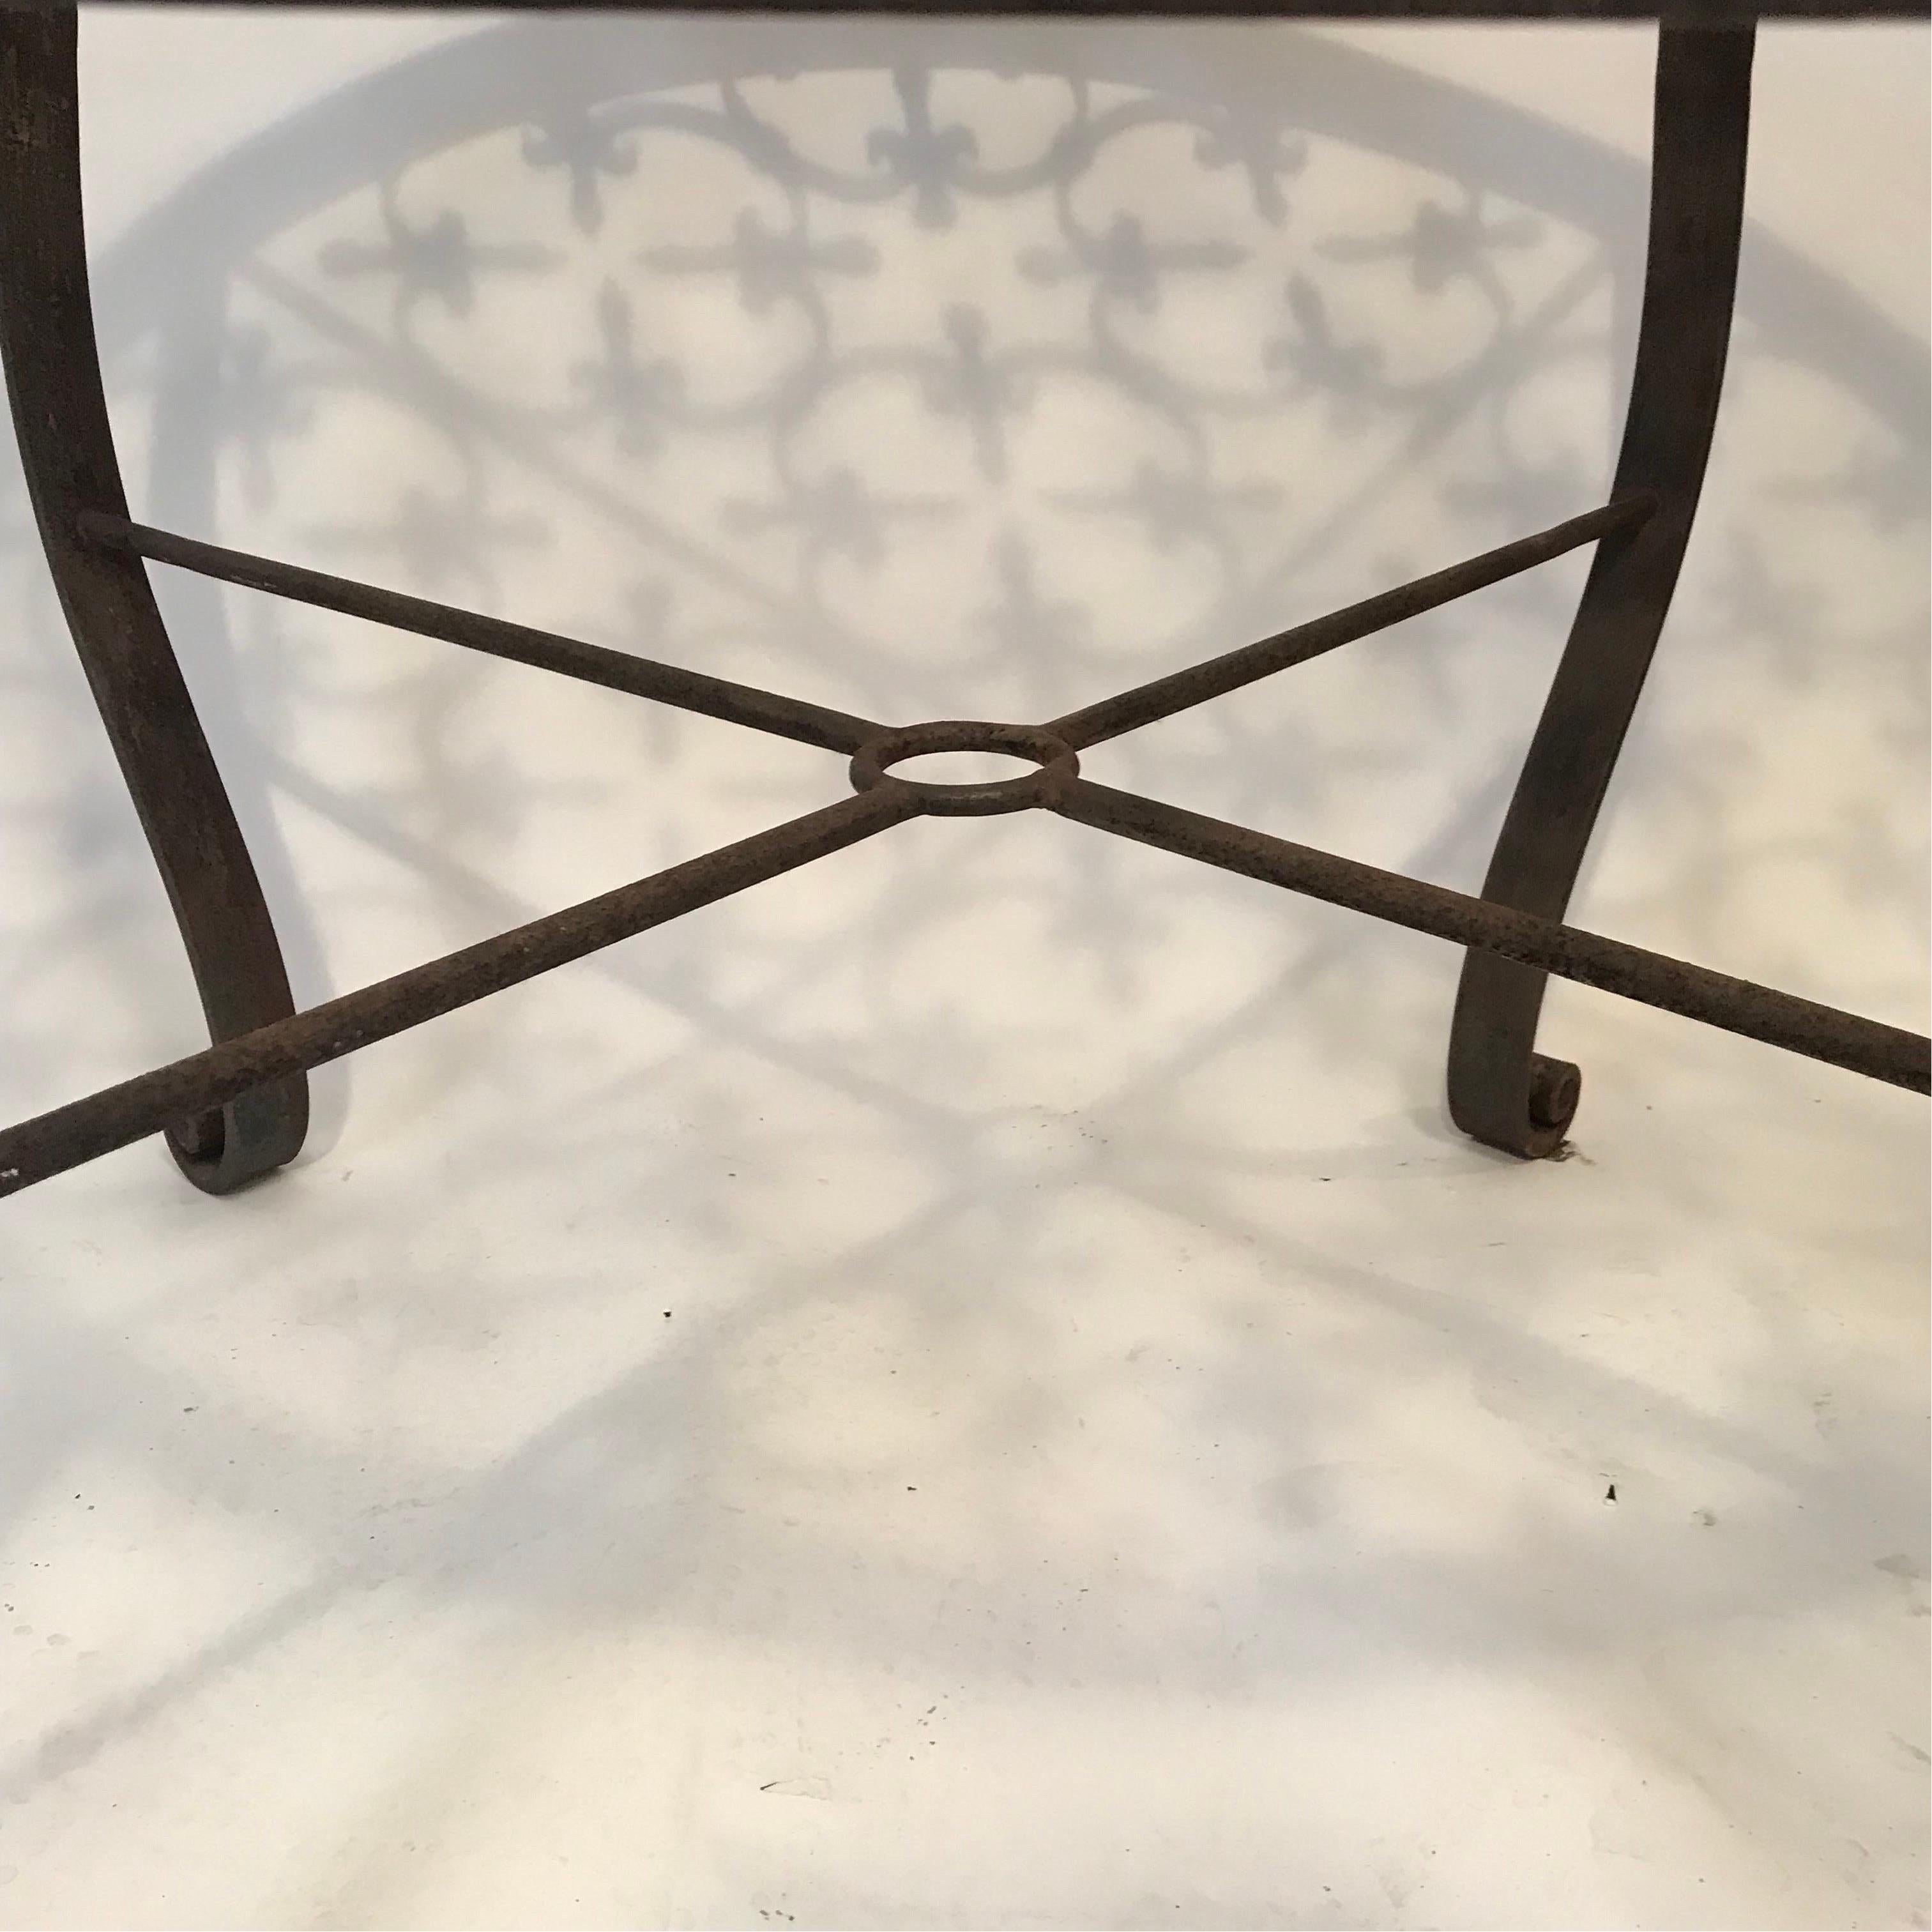 A 20th Century French Gate Repurposed into a Contemporary Iron Garden Table  6